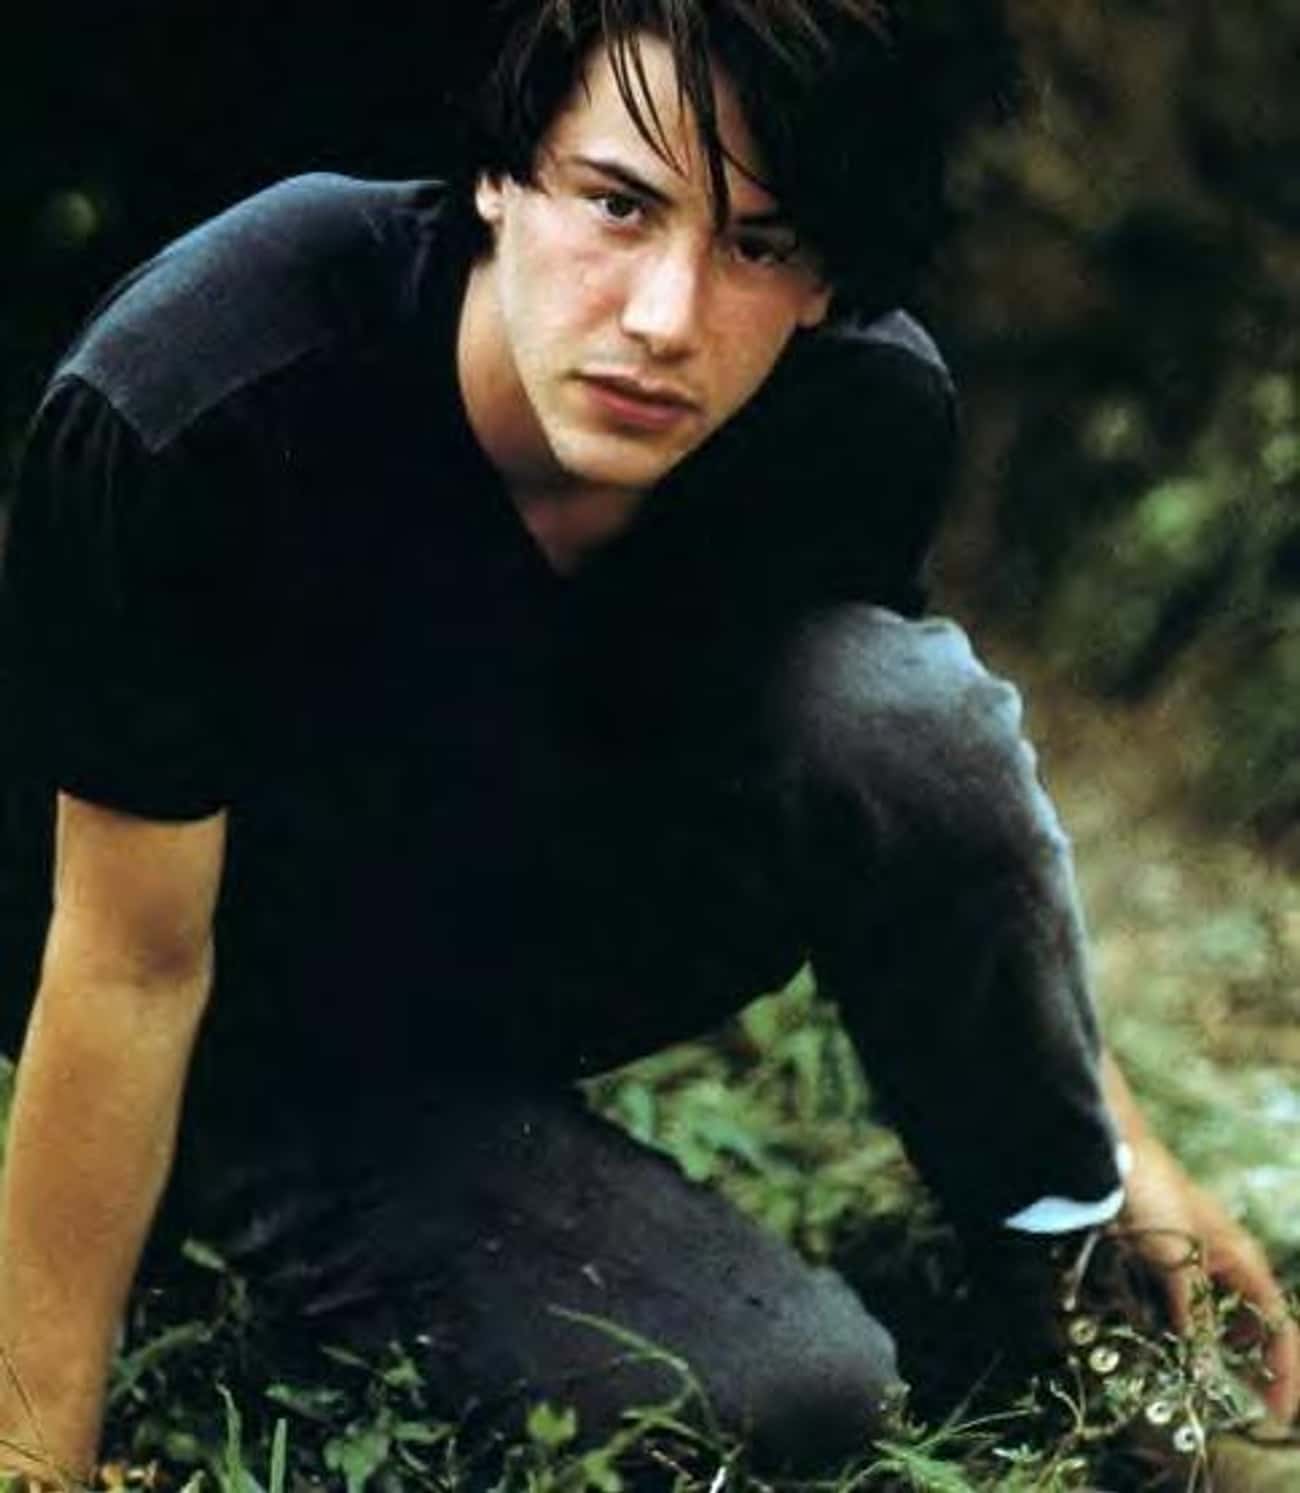 Young Keanu in Black V-Neck T-Shirt and Dark Jeans